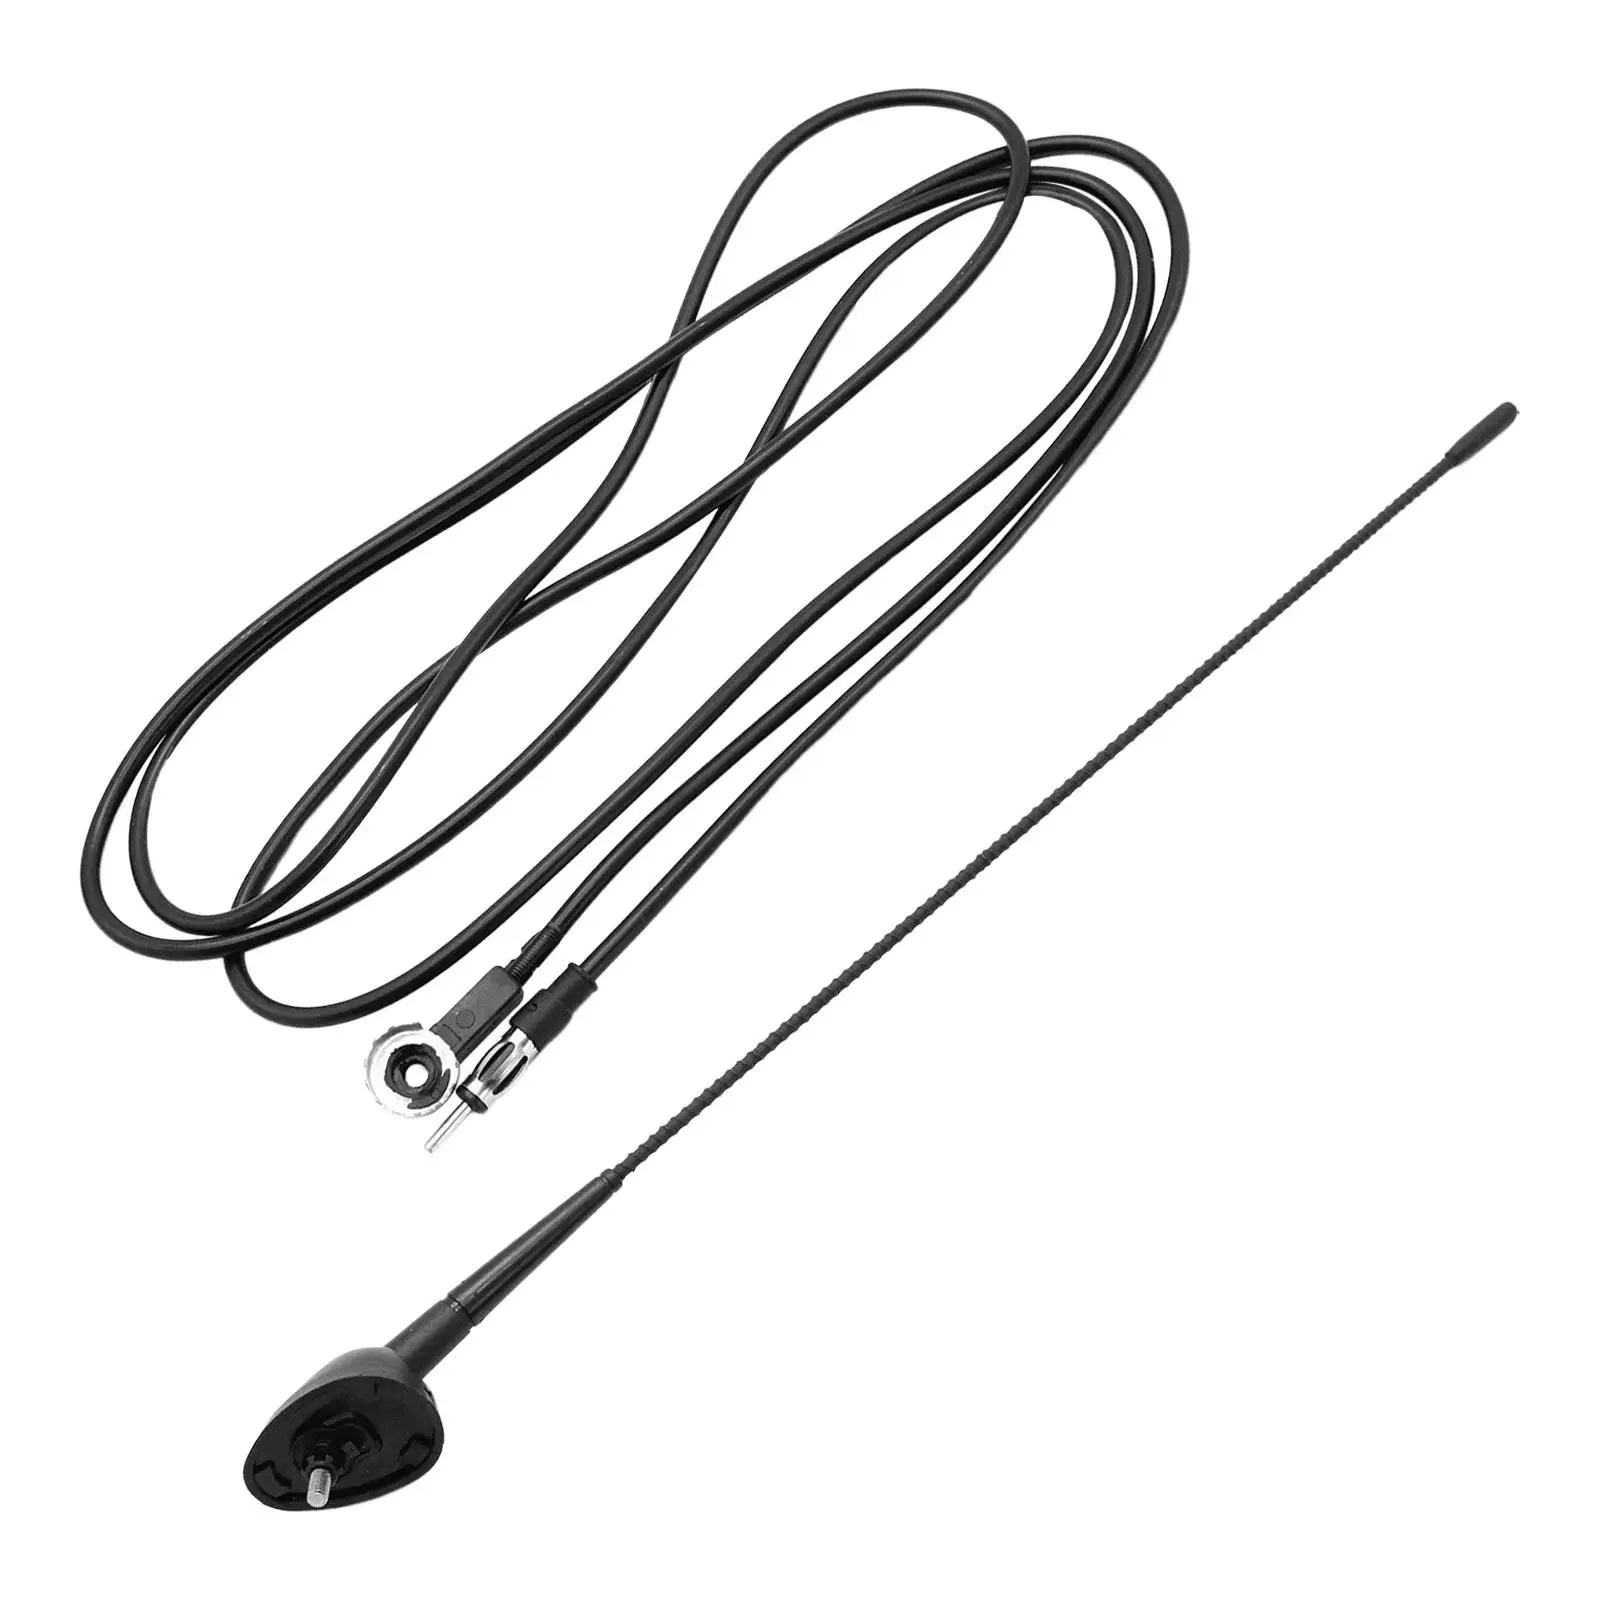 

Front Roof Antenna Mast Cable 2858939969 High Performance Flexible Directly Replace for Fiat PUNTO Brava Ducato Bravo Ritmo